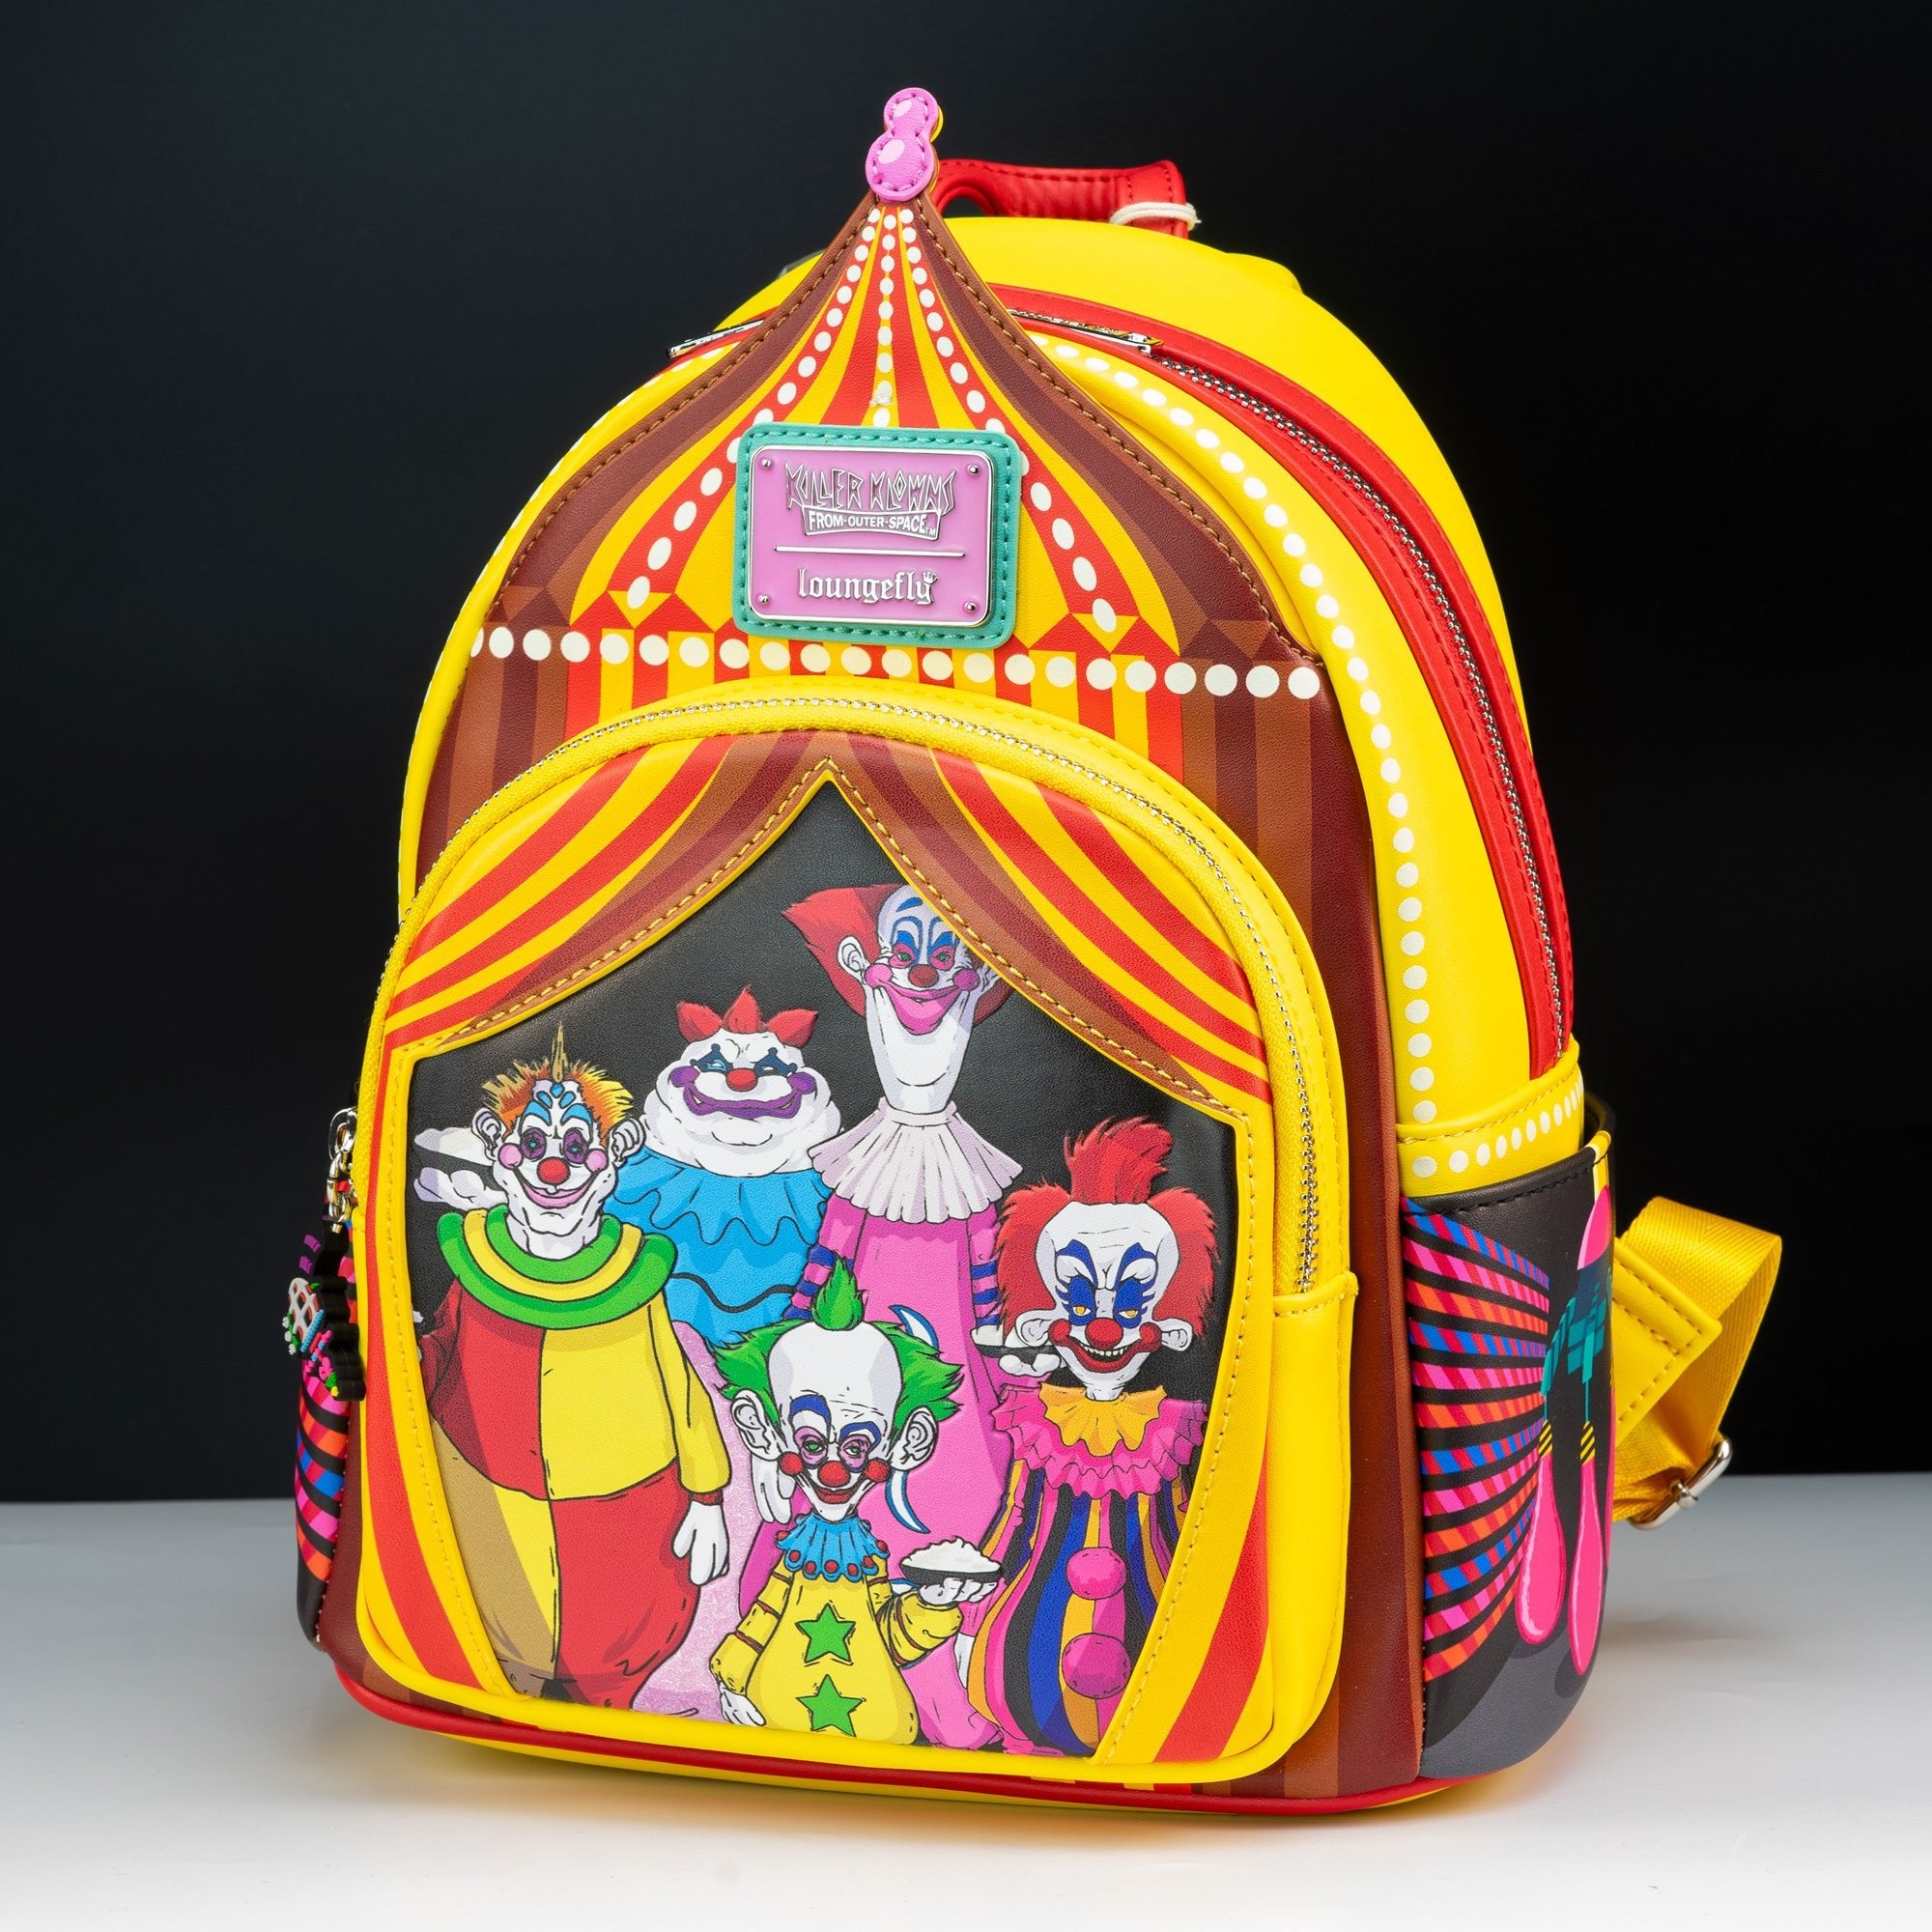 Loungefly x MGM Studios’ Killer Klowns from Outer Space Mini Backpack - GeekCore